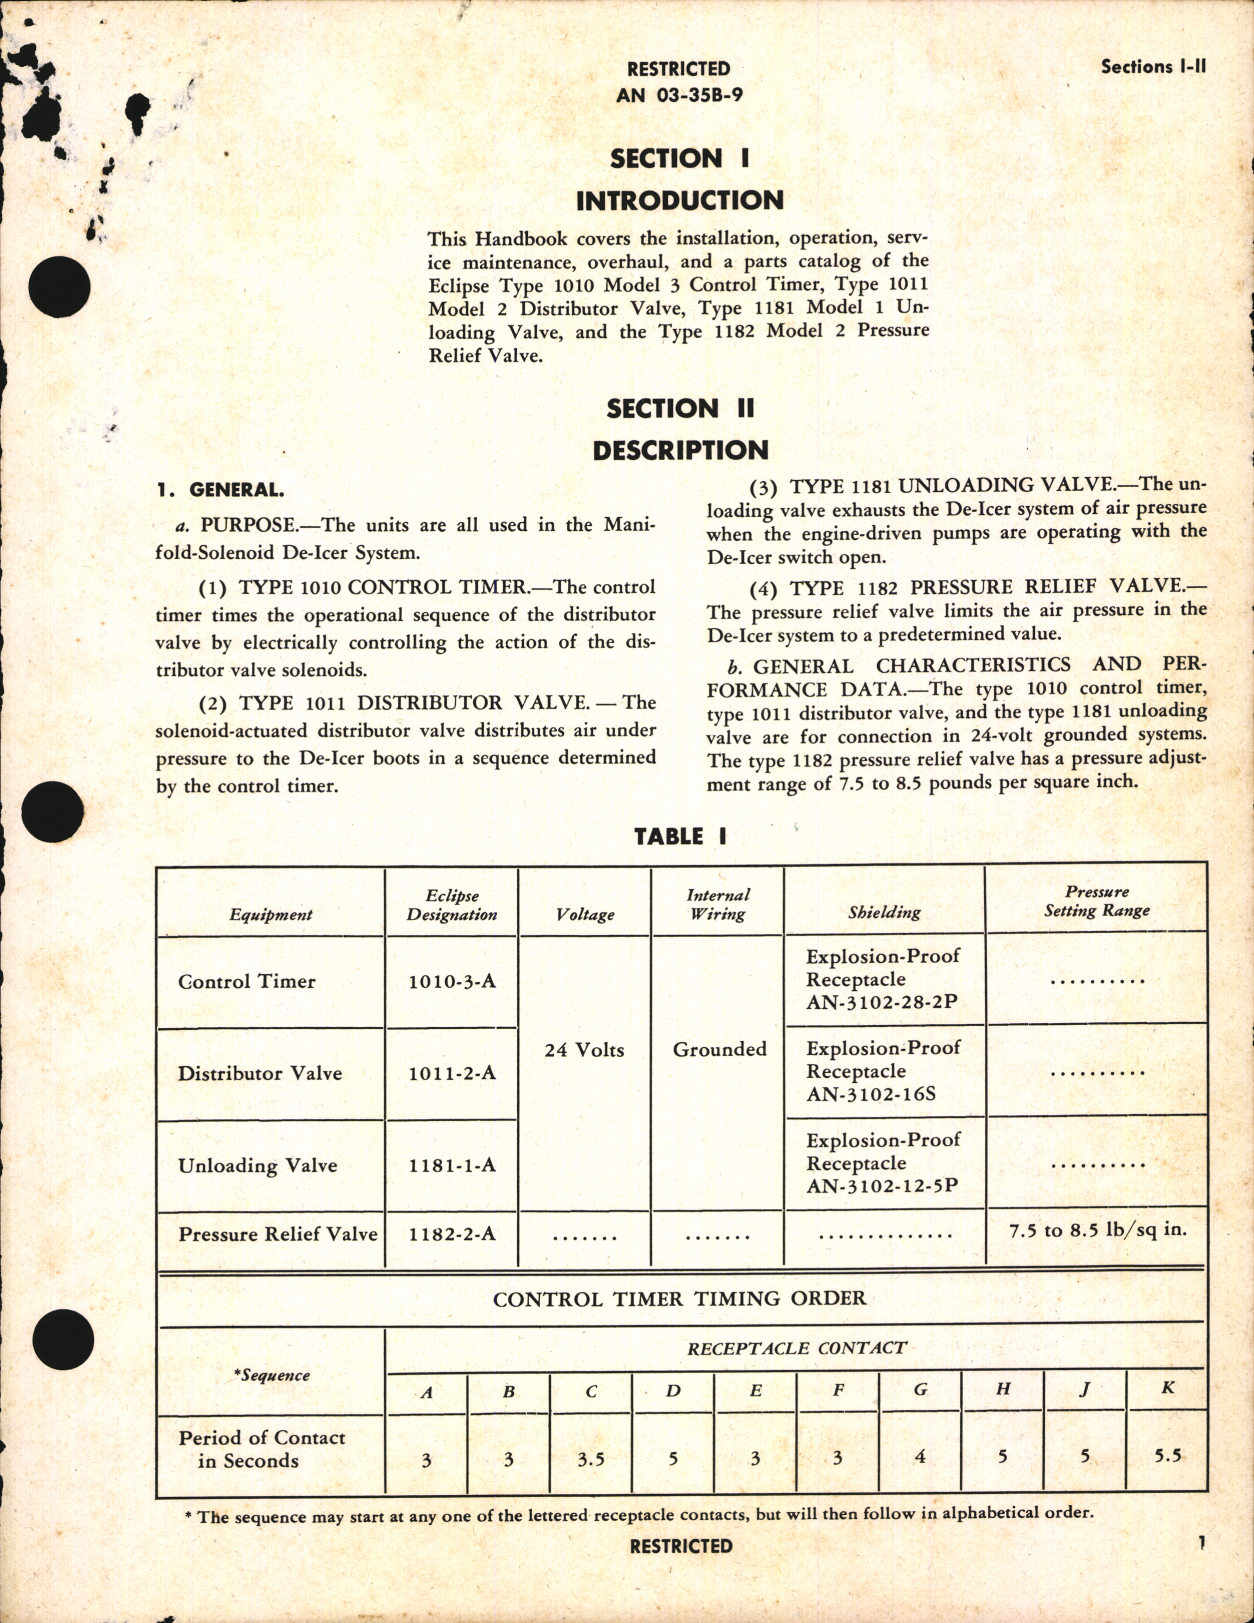 Sample page 7 from AirCorps Library document: Handbook of Instructions with Parts Catalog for De-Icer System Valves